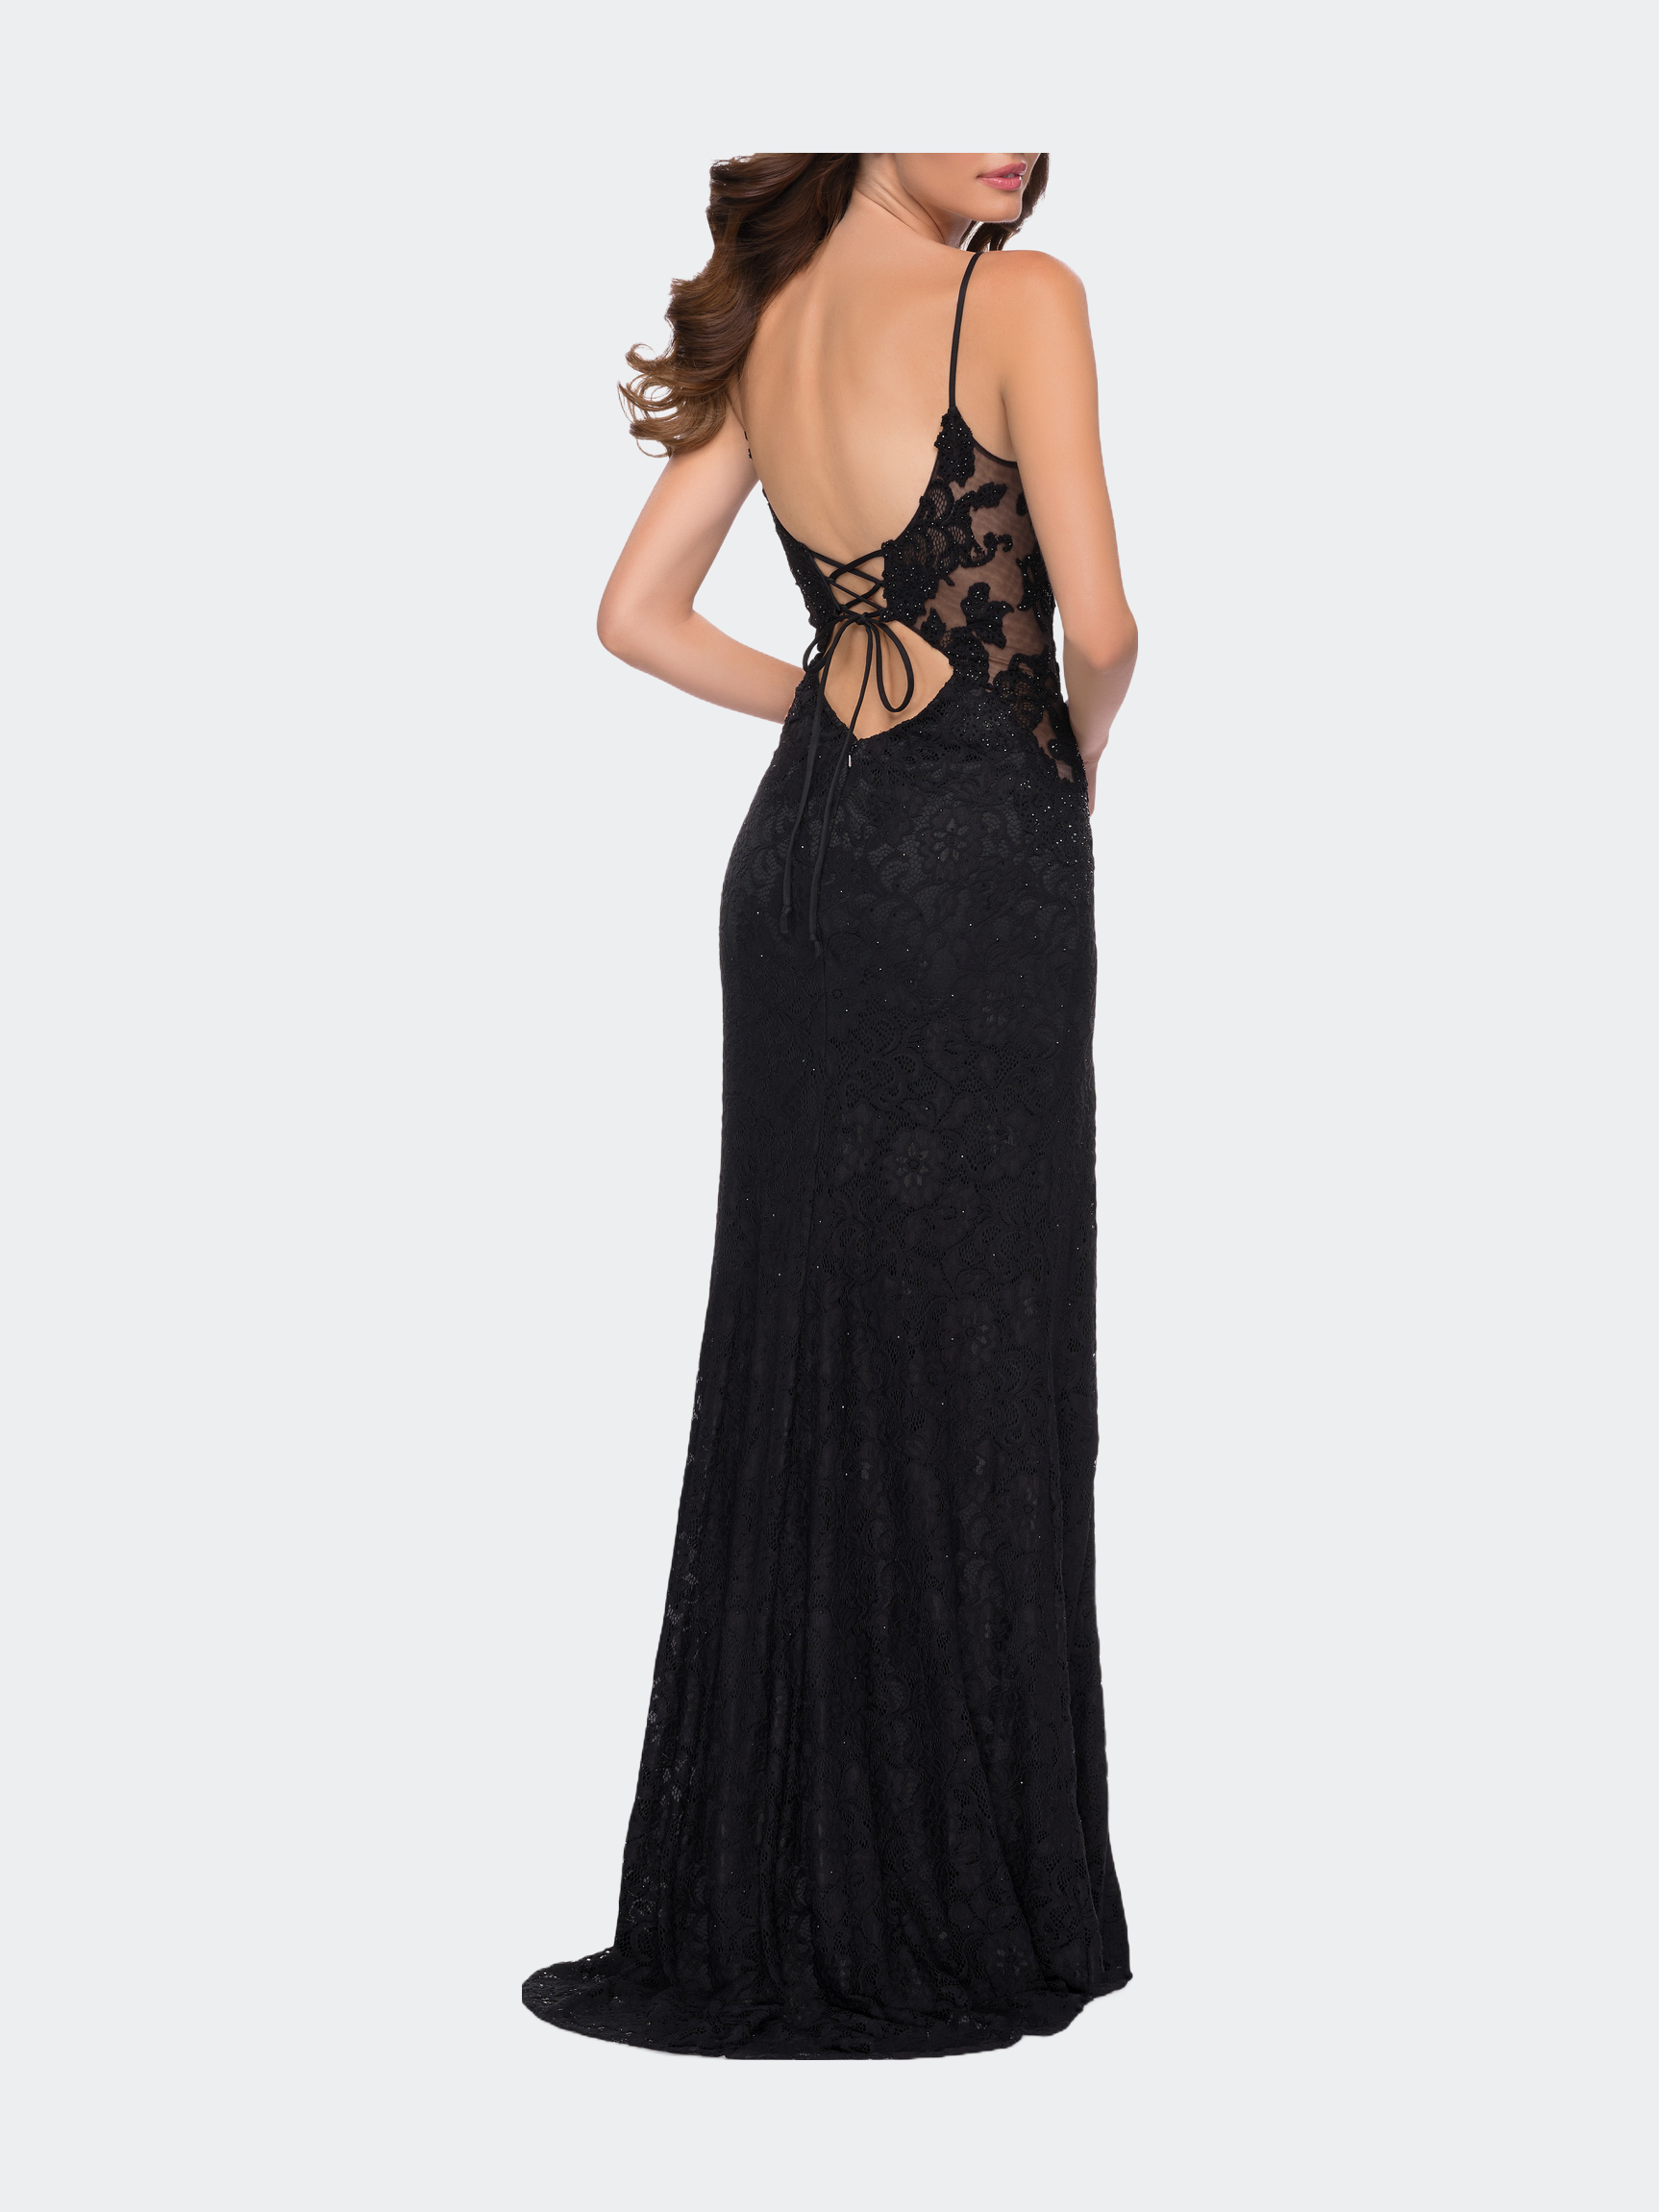 La Femme Sleek Lace Long Dress with Sheer Sides and Open Back